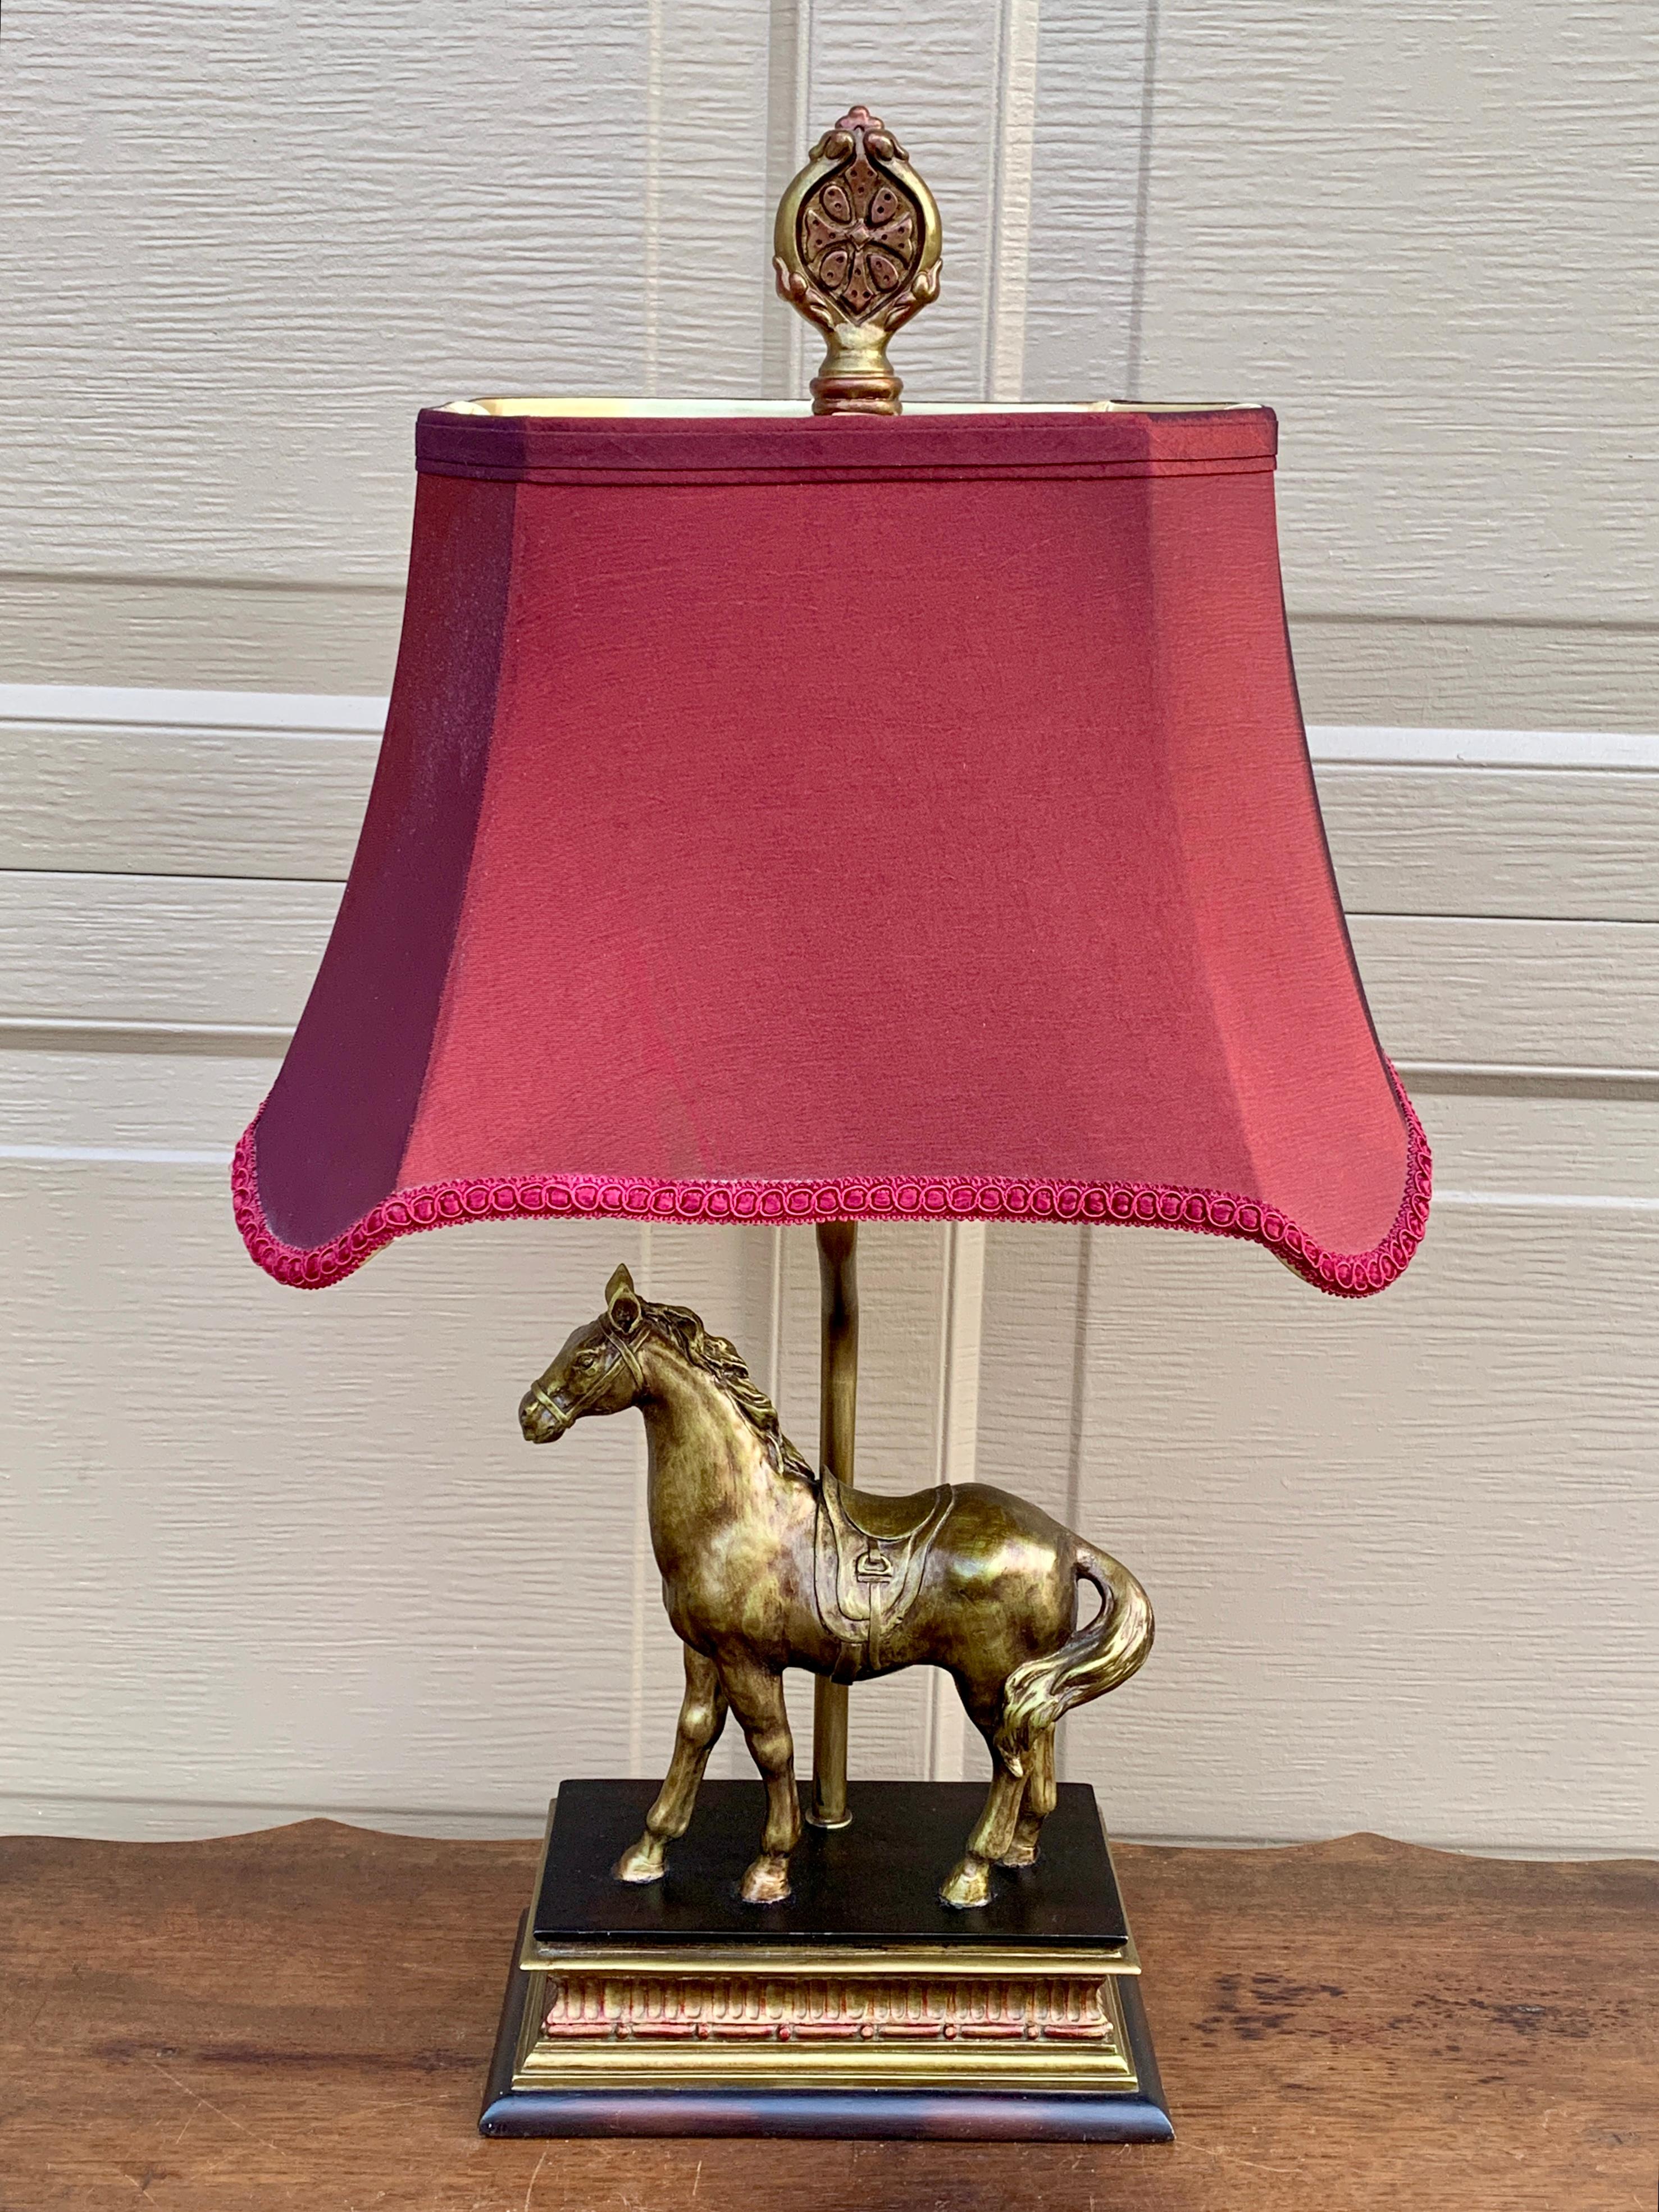 A gorgeous English Country style equestrian lamp featuring a horse and a cranberry colored fabric shade

USA, 21st Century

Measures: 13